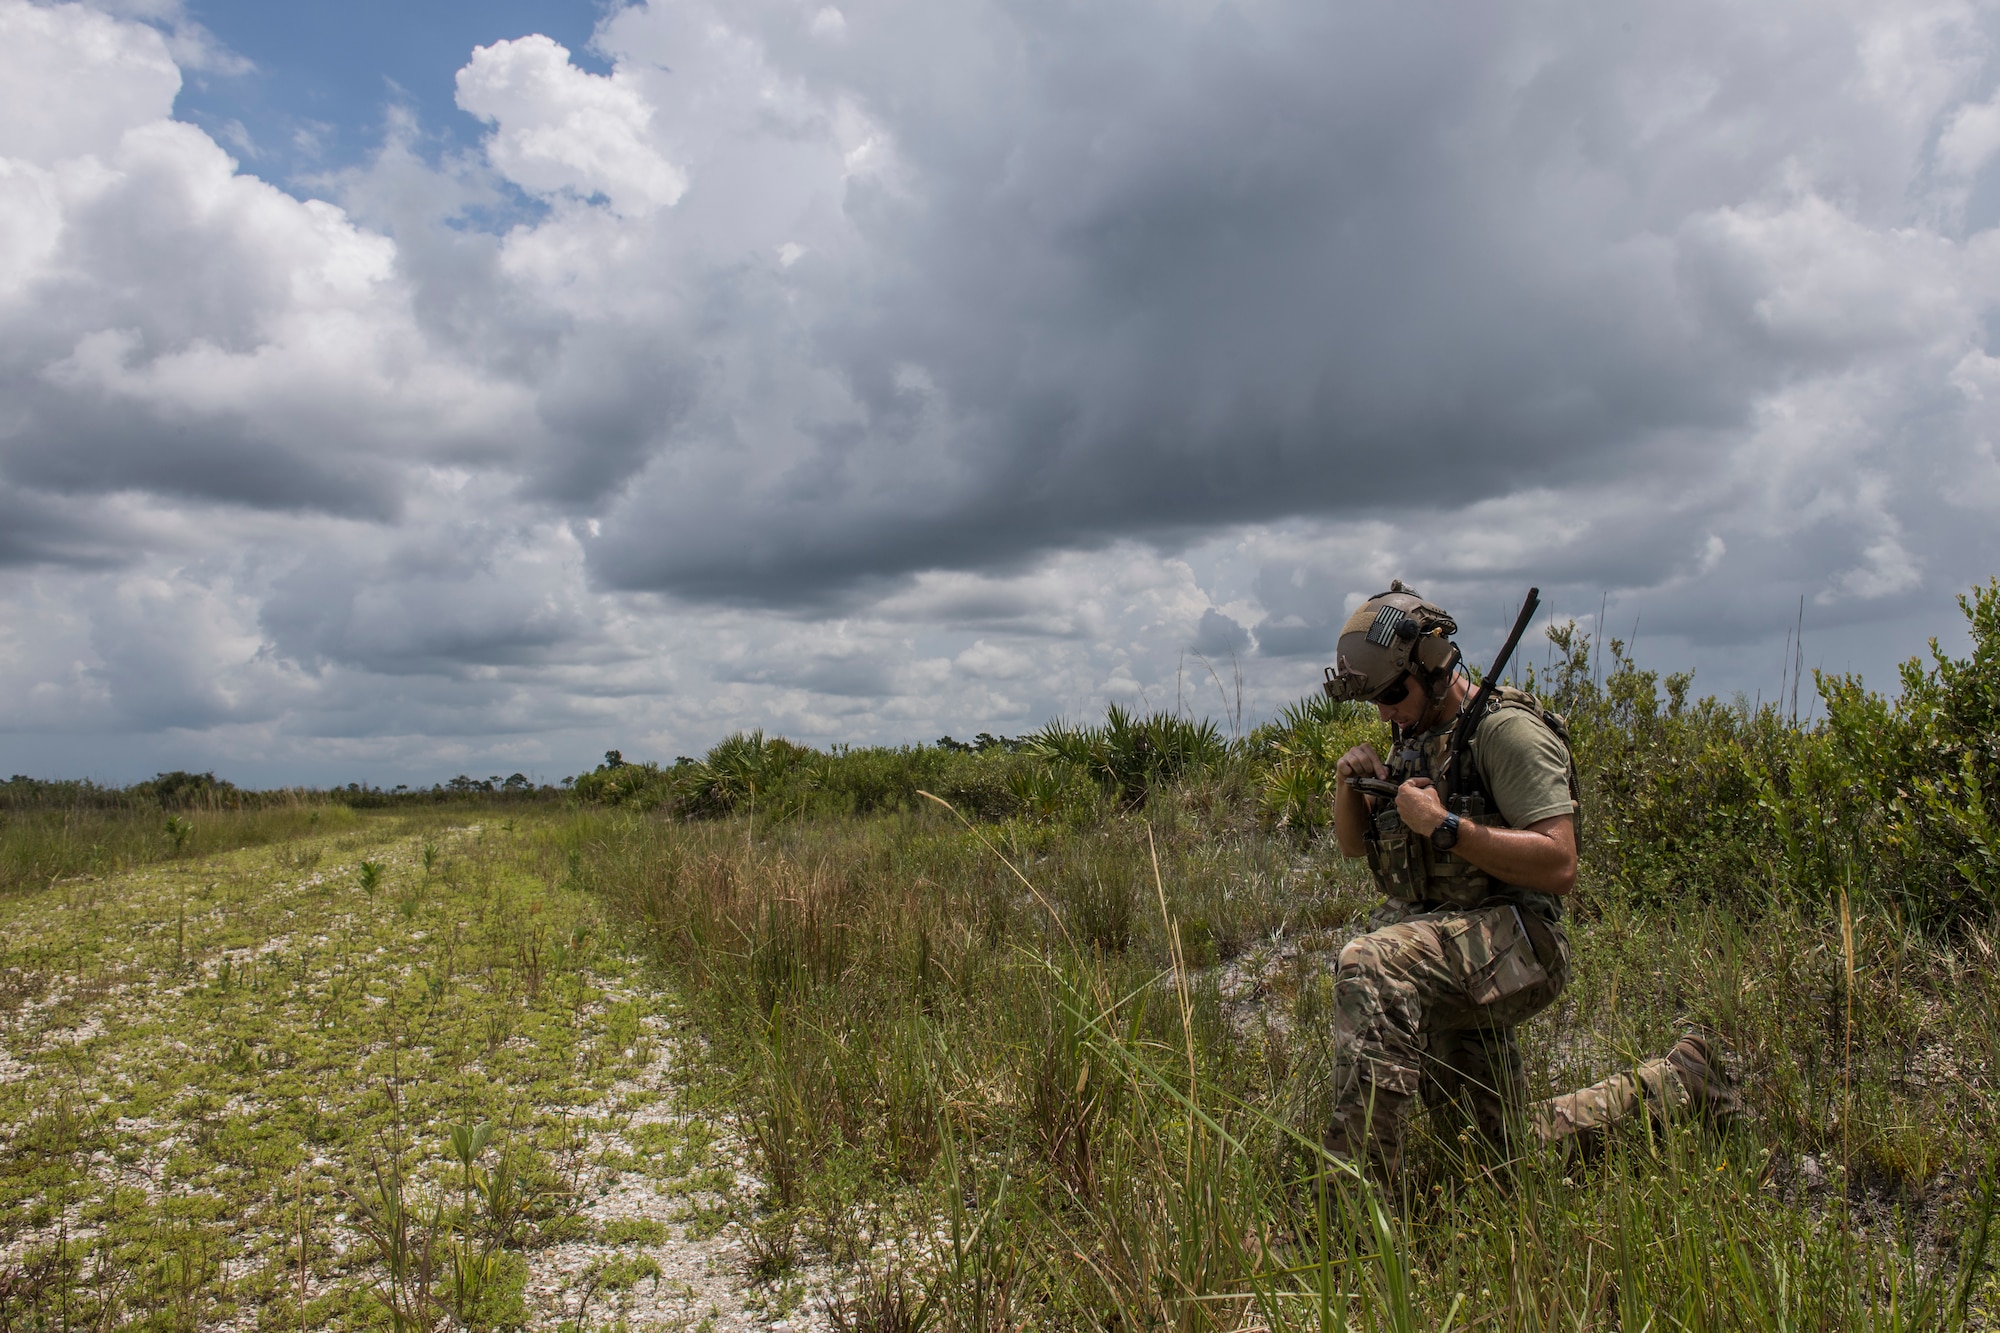 A special operations operator kneels in high grass while talking into his radio gear as part of close air support training during the Special Operations Terminal Attack Controller Course at Avon Park Florida, Aug. 6, 2020